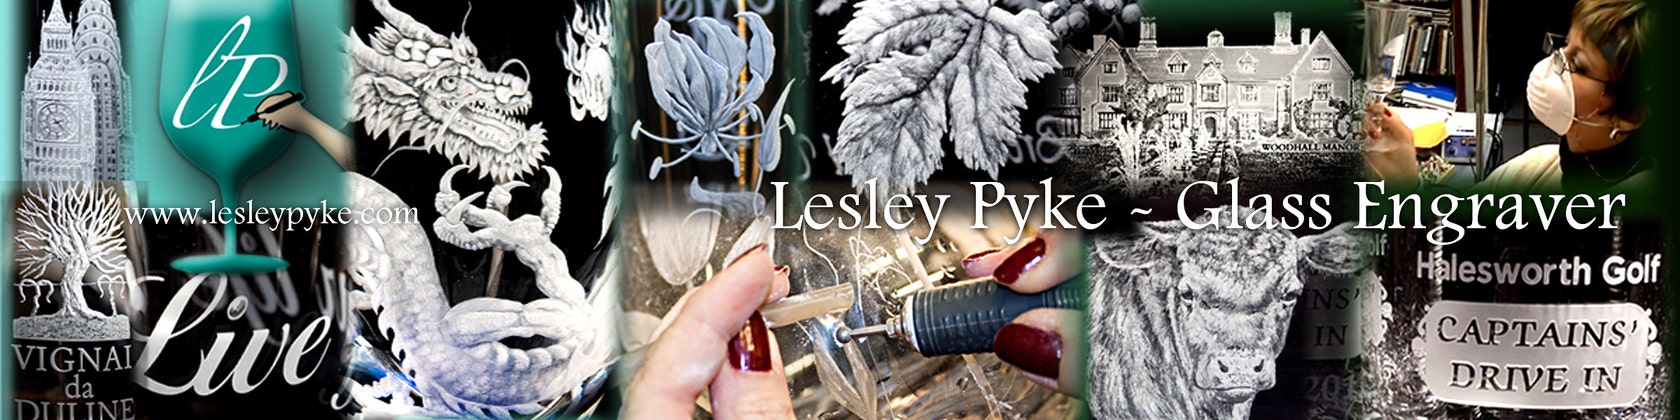 Lesley Pyke Glass Engraver  creating Glass Engraving lessons